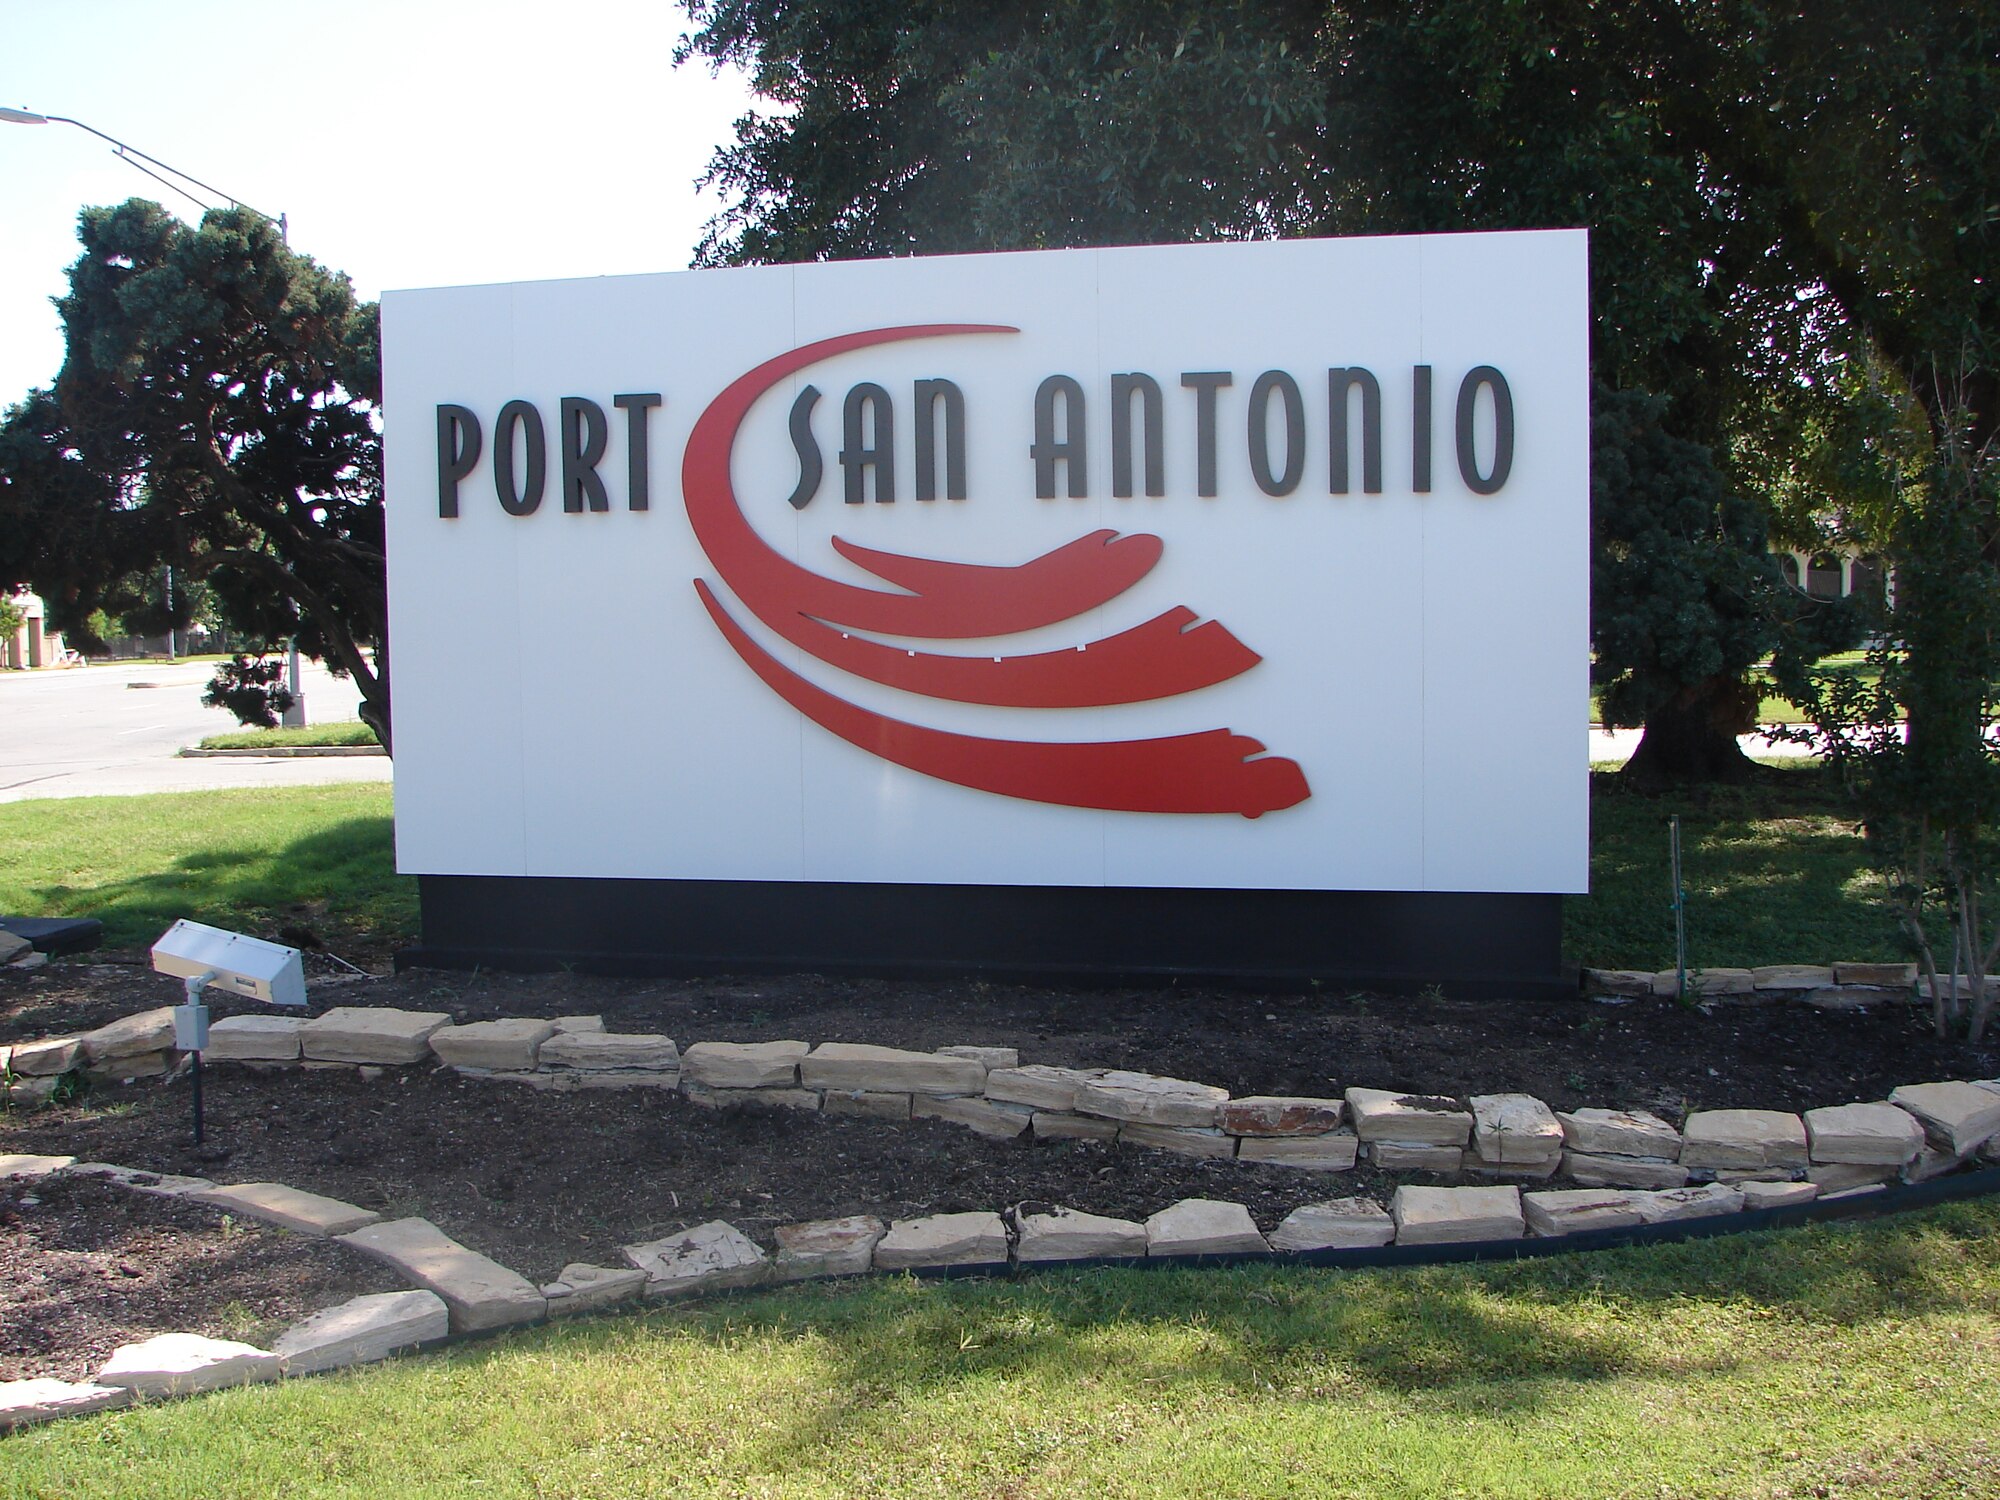 The Port of San Antonio, formerly Kelly Air Force Base, Texas.